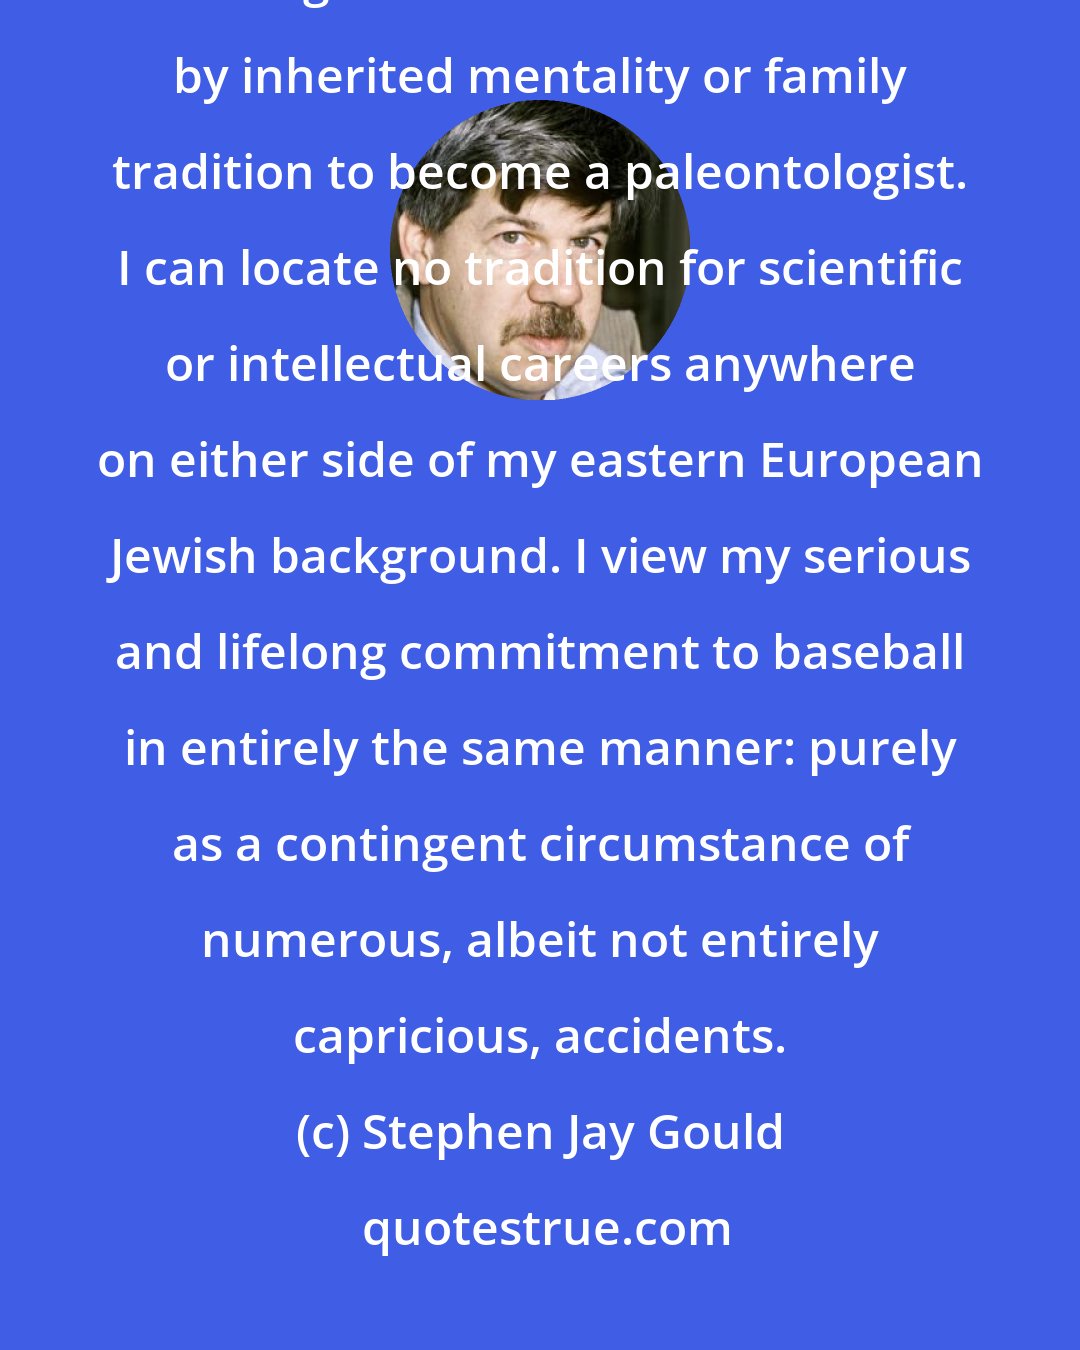 Stephen Jay Gould: I view the major features of my own odyssey as a set of mostly fortunate contingencies. I was not destined by inherited mentality or family tradition to become a paleontologist. I can locate no tradition for scientific or intellectual careers anywhere on either side of my eastern European Jewish background. I view my serious and lifelong commitment to baseball in entirely the same manner: purely as a contingent circumstance of numerous, albeit not entirely capricious, accidents.